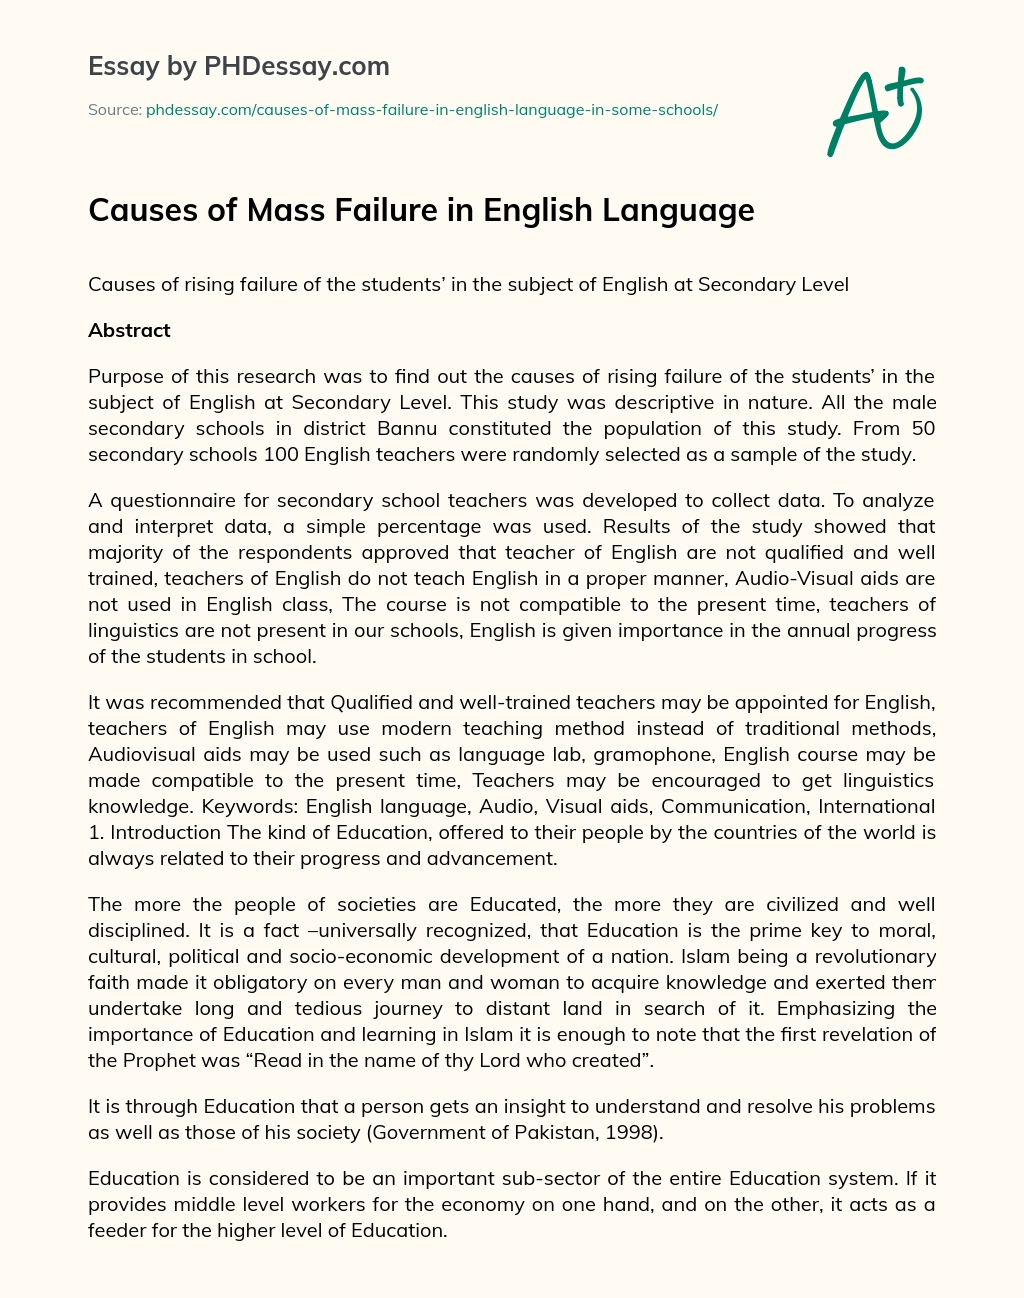 Causes of Mass Failure in English Language essay